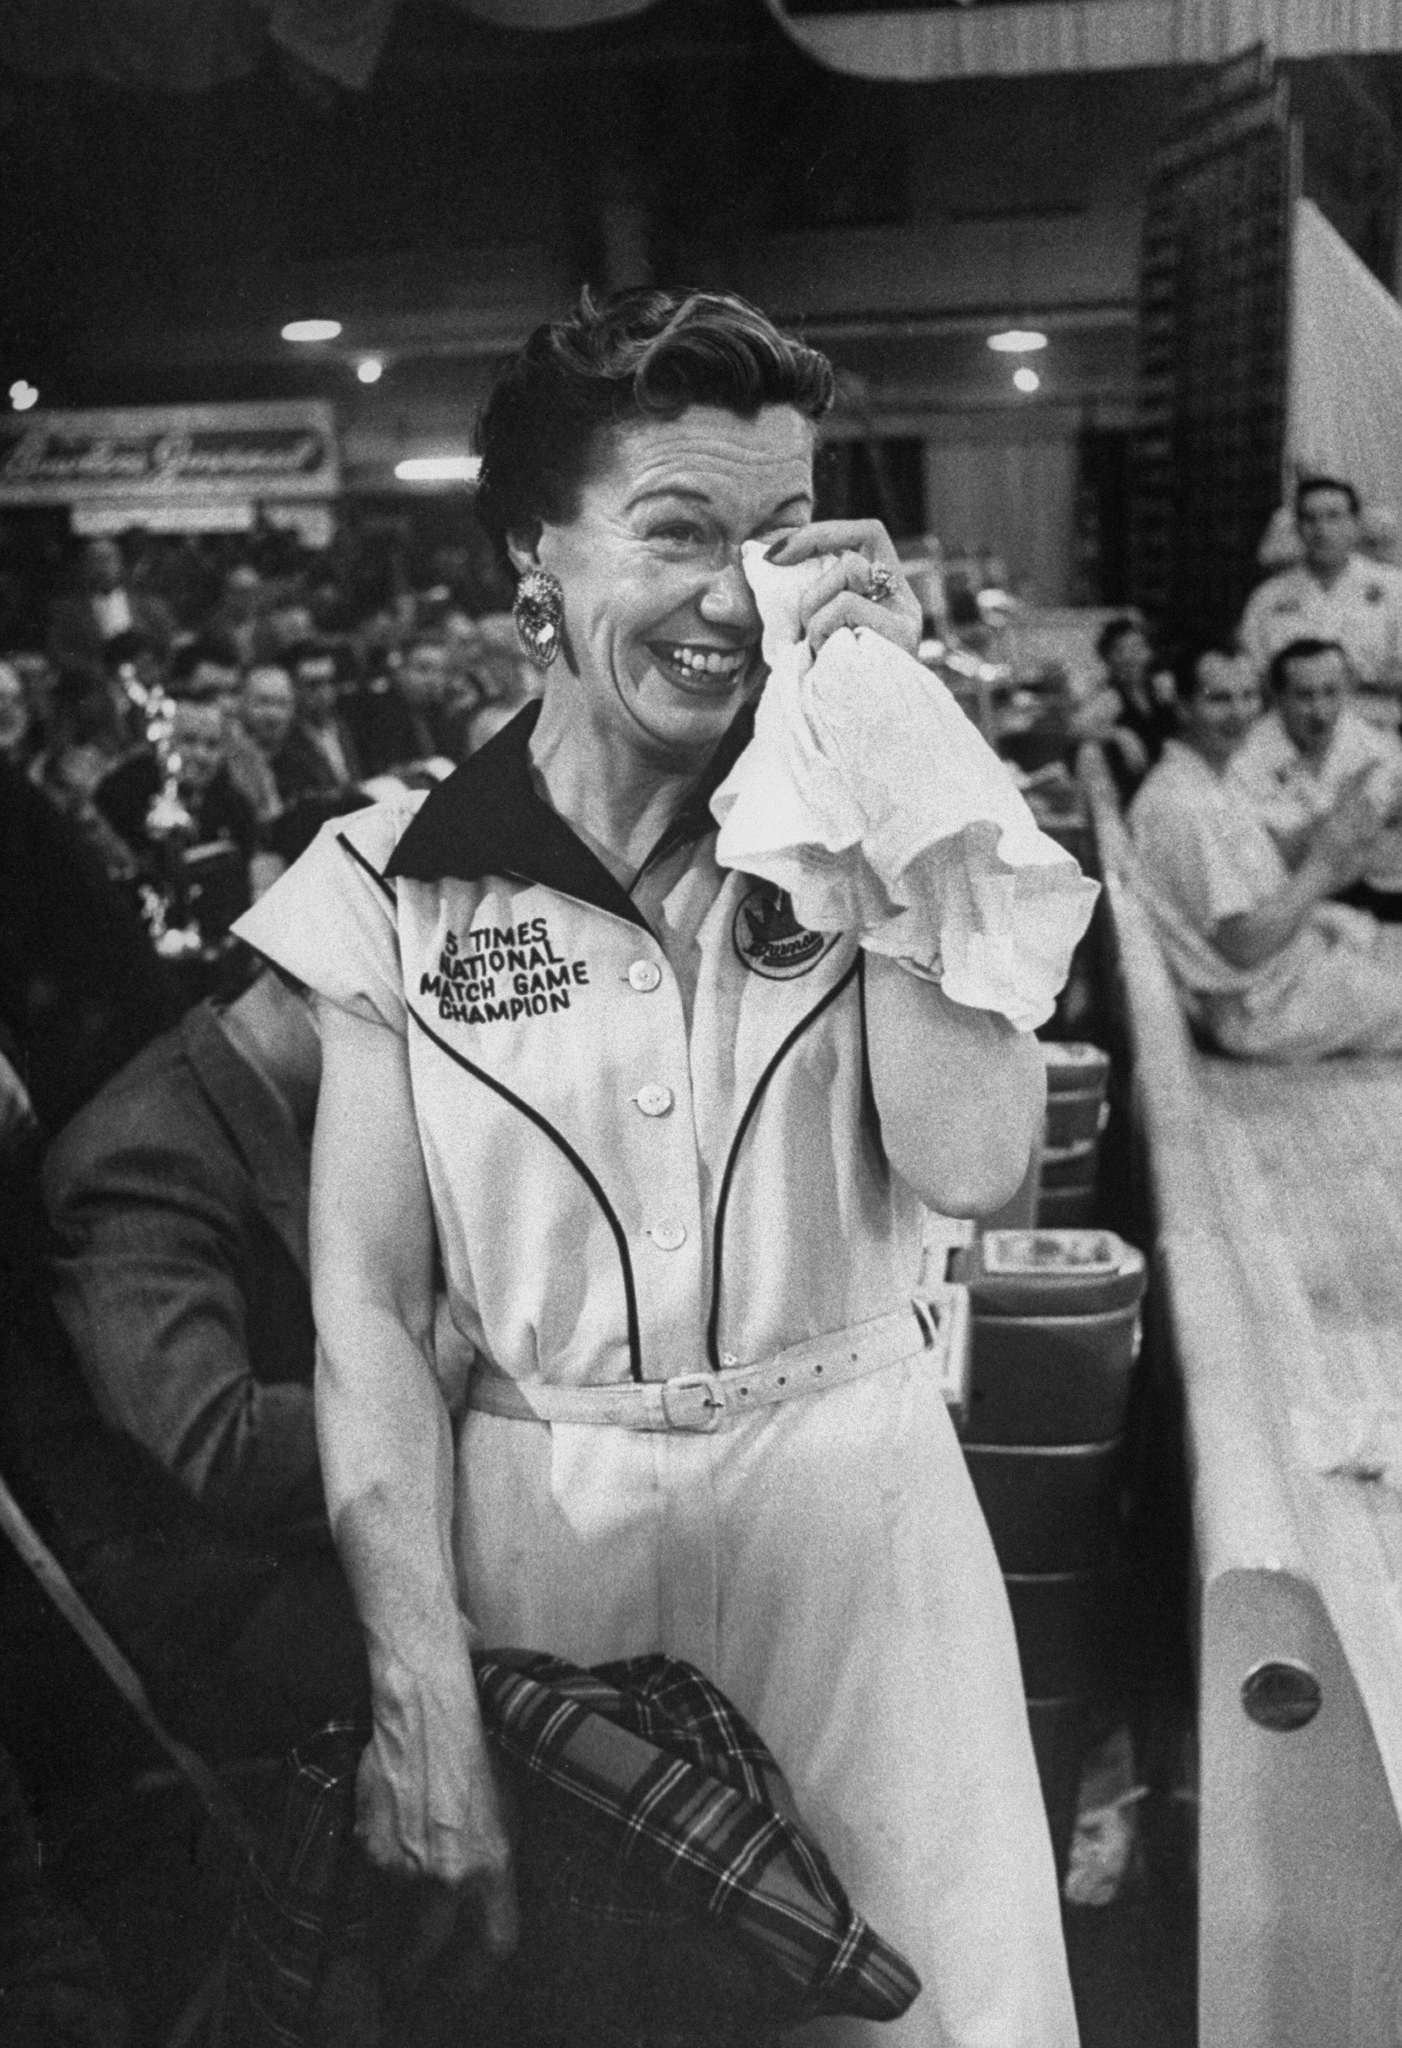 Marion Ladewig, the "Queen of Bowling," dabs at her eyes after losing a championship tournament.